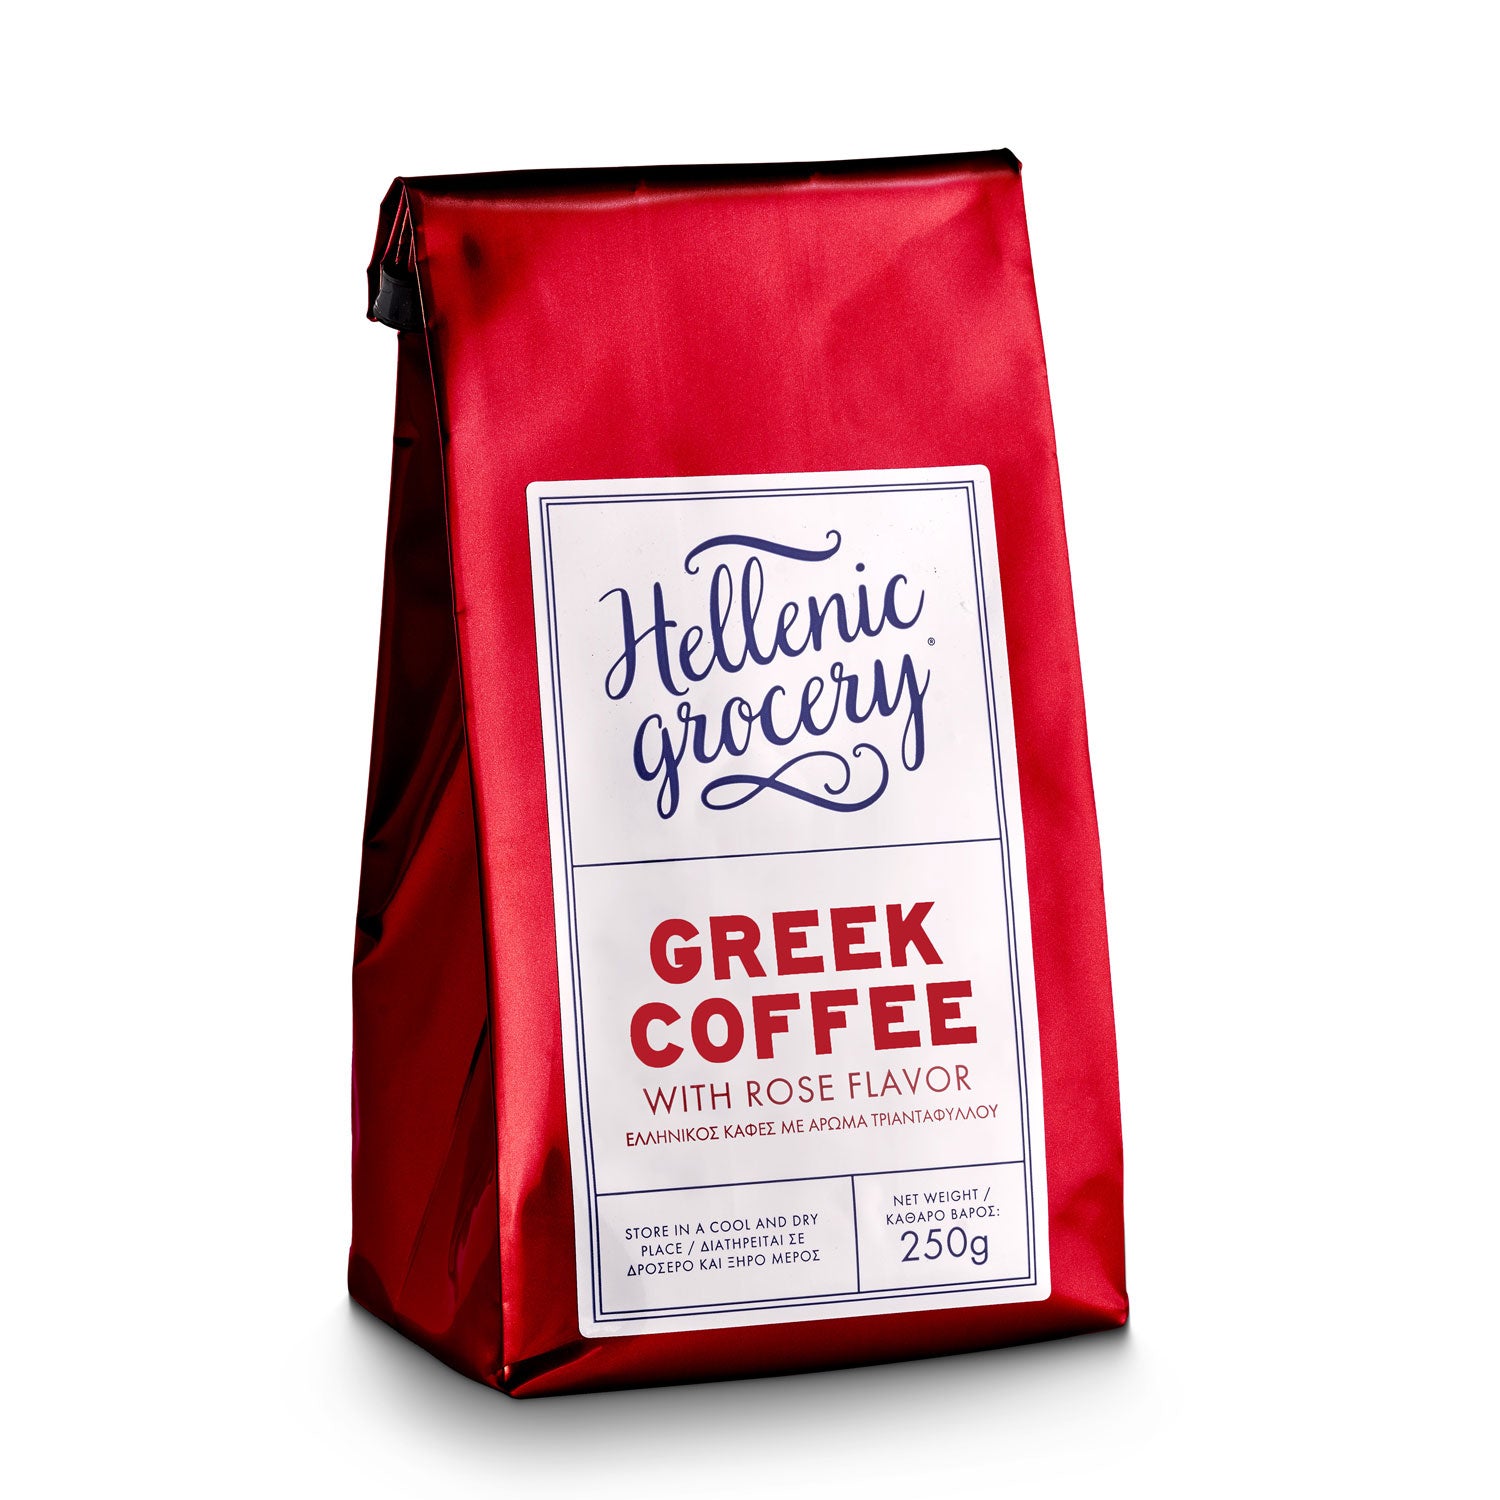 Greek Coffee Rose flavour - 250g - Hellenic Grocery